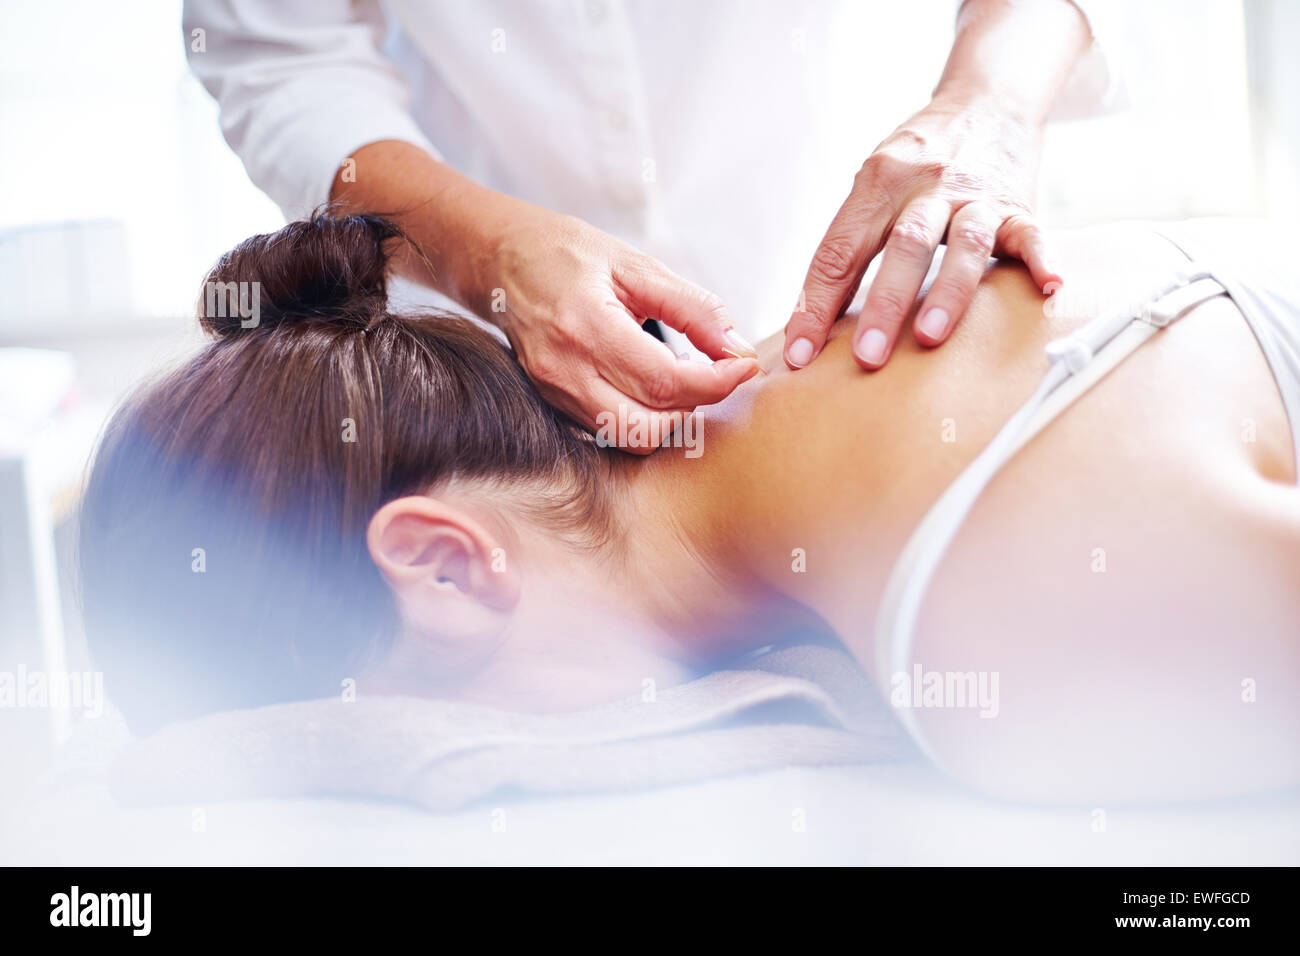 Acupuncturist applying acupuncture needles to woman’s neck Stock Photo